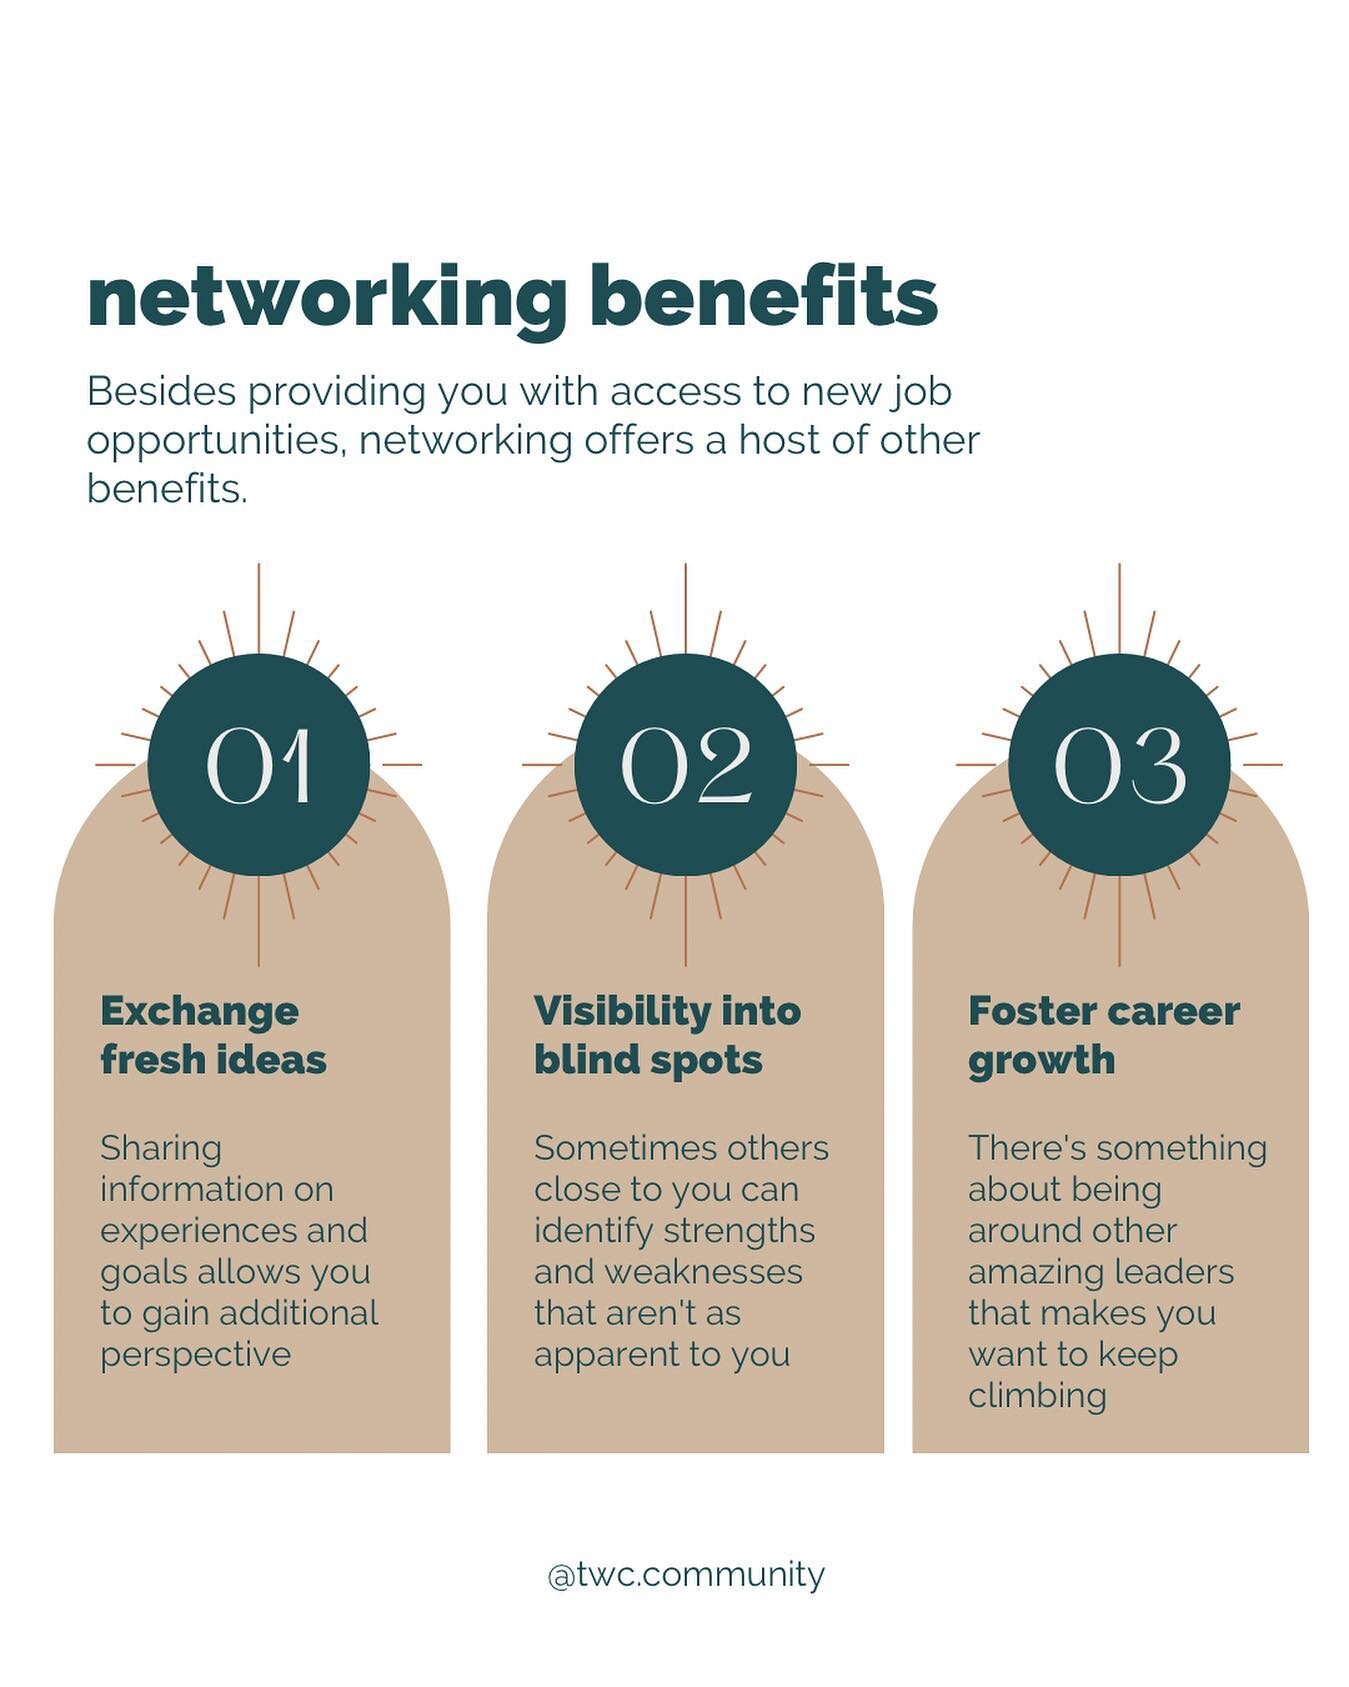 If you&rsquo;re only reaching out to your network for job leads, you&rsquo;re doing it wrong 🤷🏾&zwj;♀️

Share your favorite networking benefit below 👇🏾

&bull;
&bull;
🫶🏾 FOLLOW FOR MORE CAREER TIPS 🫶🏾
&bull;
&bull;
#careerstrategy #careertips